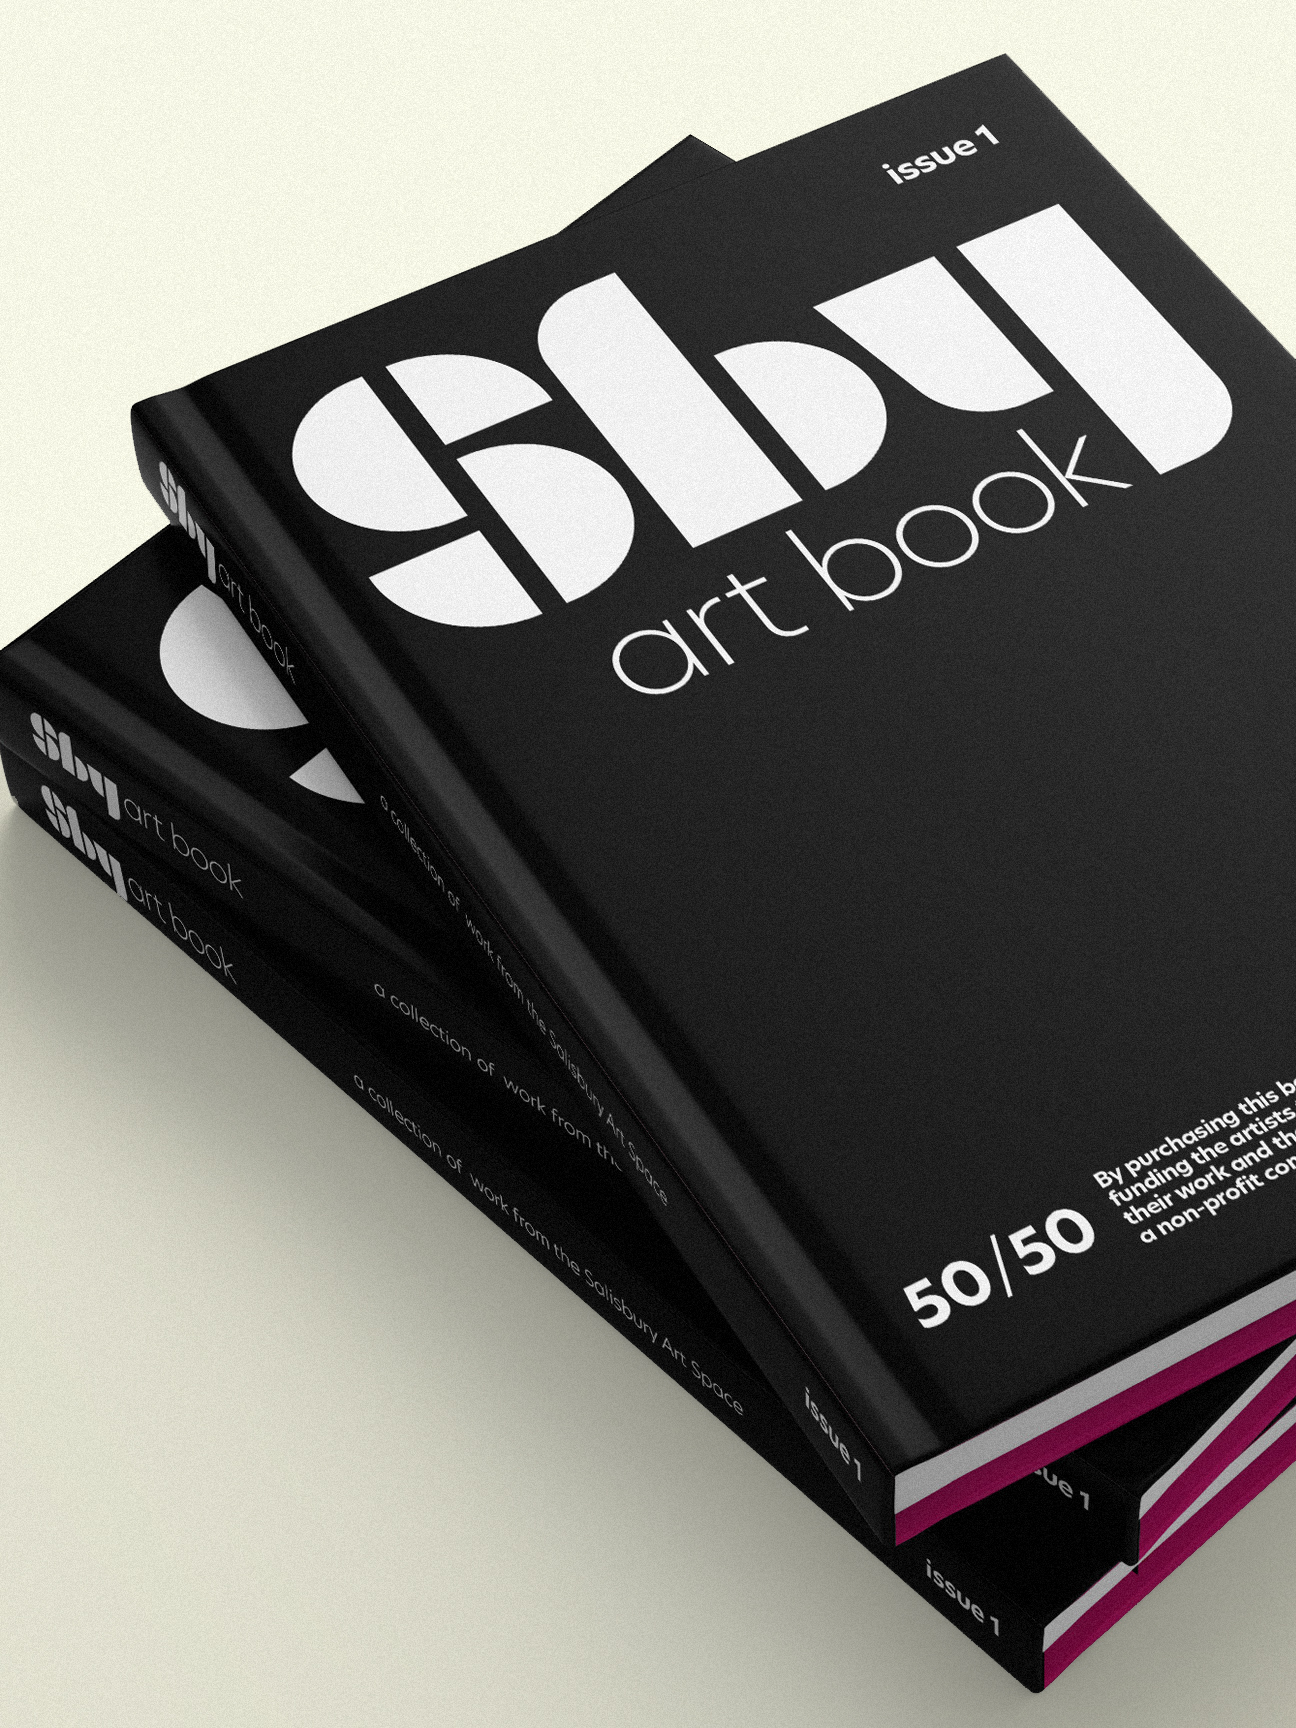 Sby art book hardback promotional product